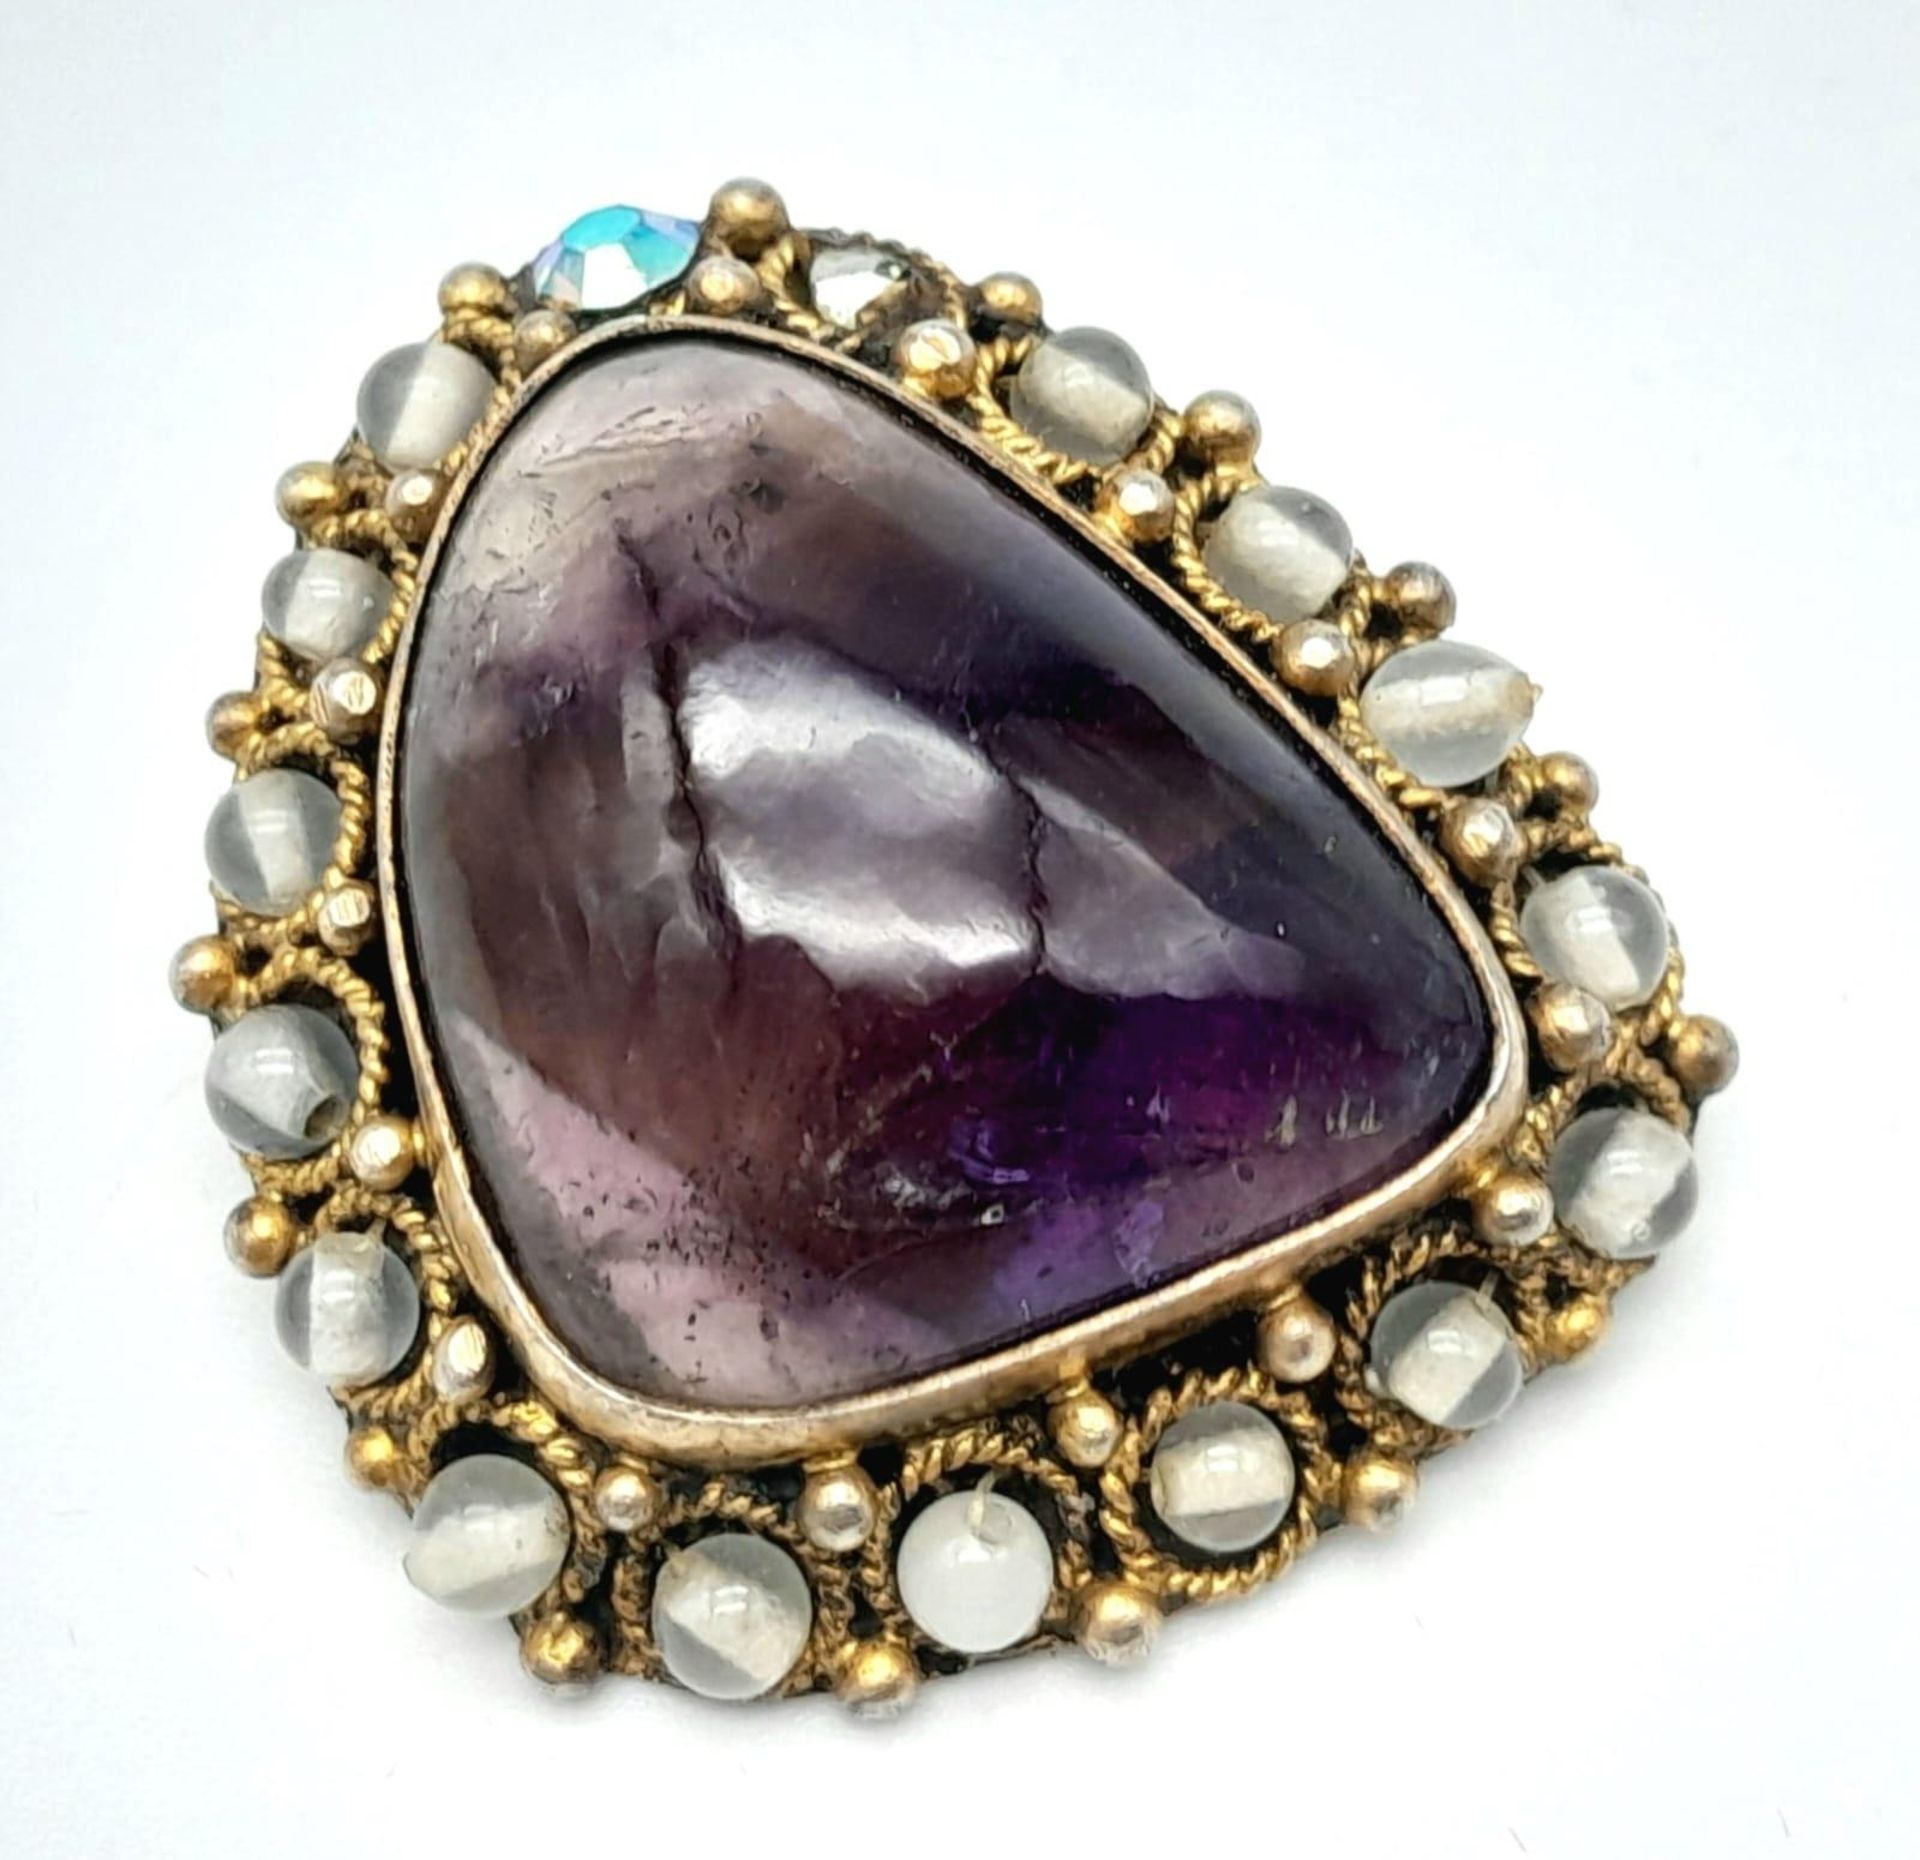 An Agate Brooch/Pendant surrounded by Quartz set in silver. Weight: 11.44g Length: 30mm x 33mm